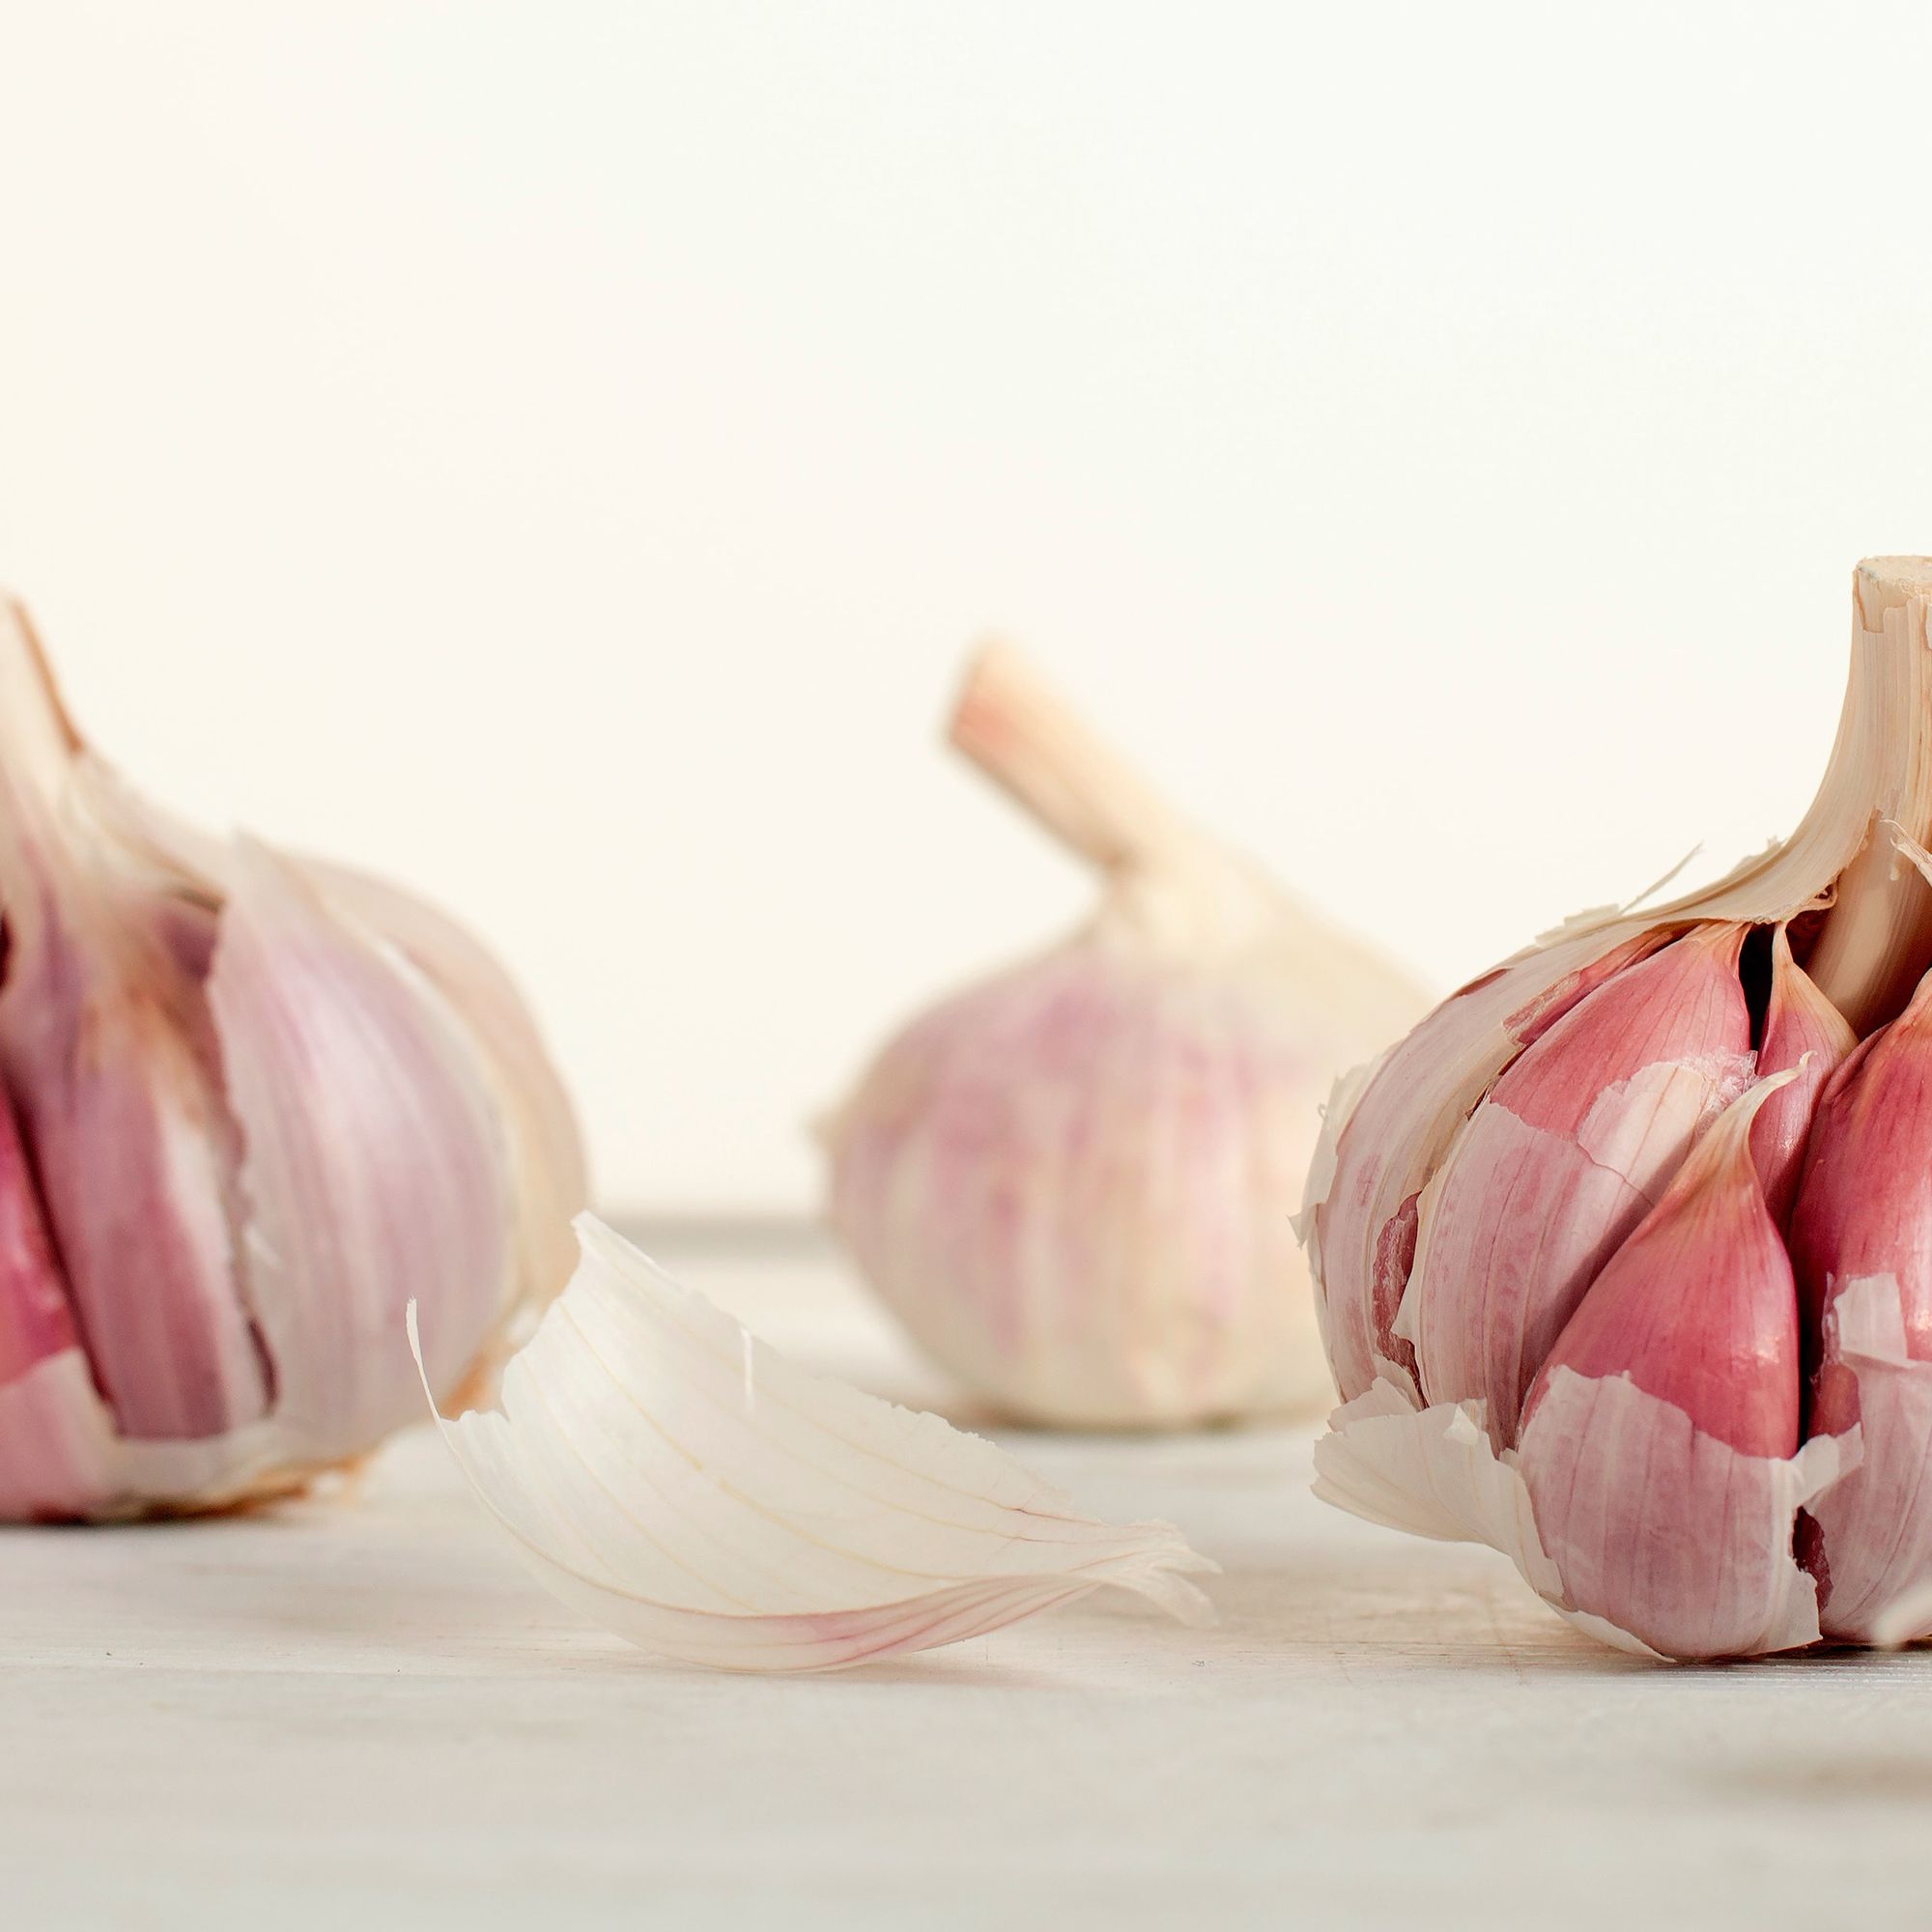 3 Tips For Growing And Storing Garlic At Home